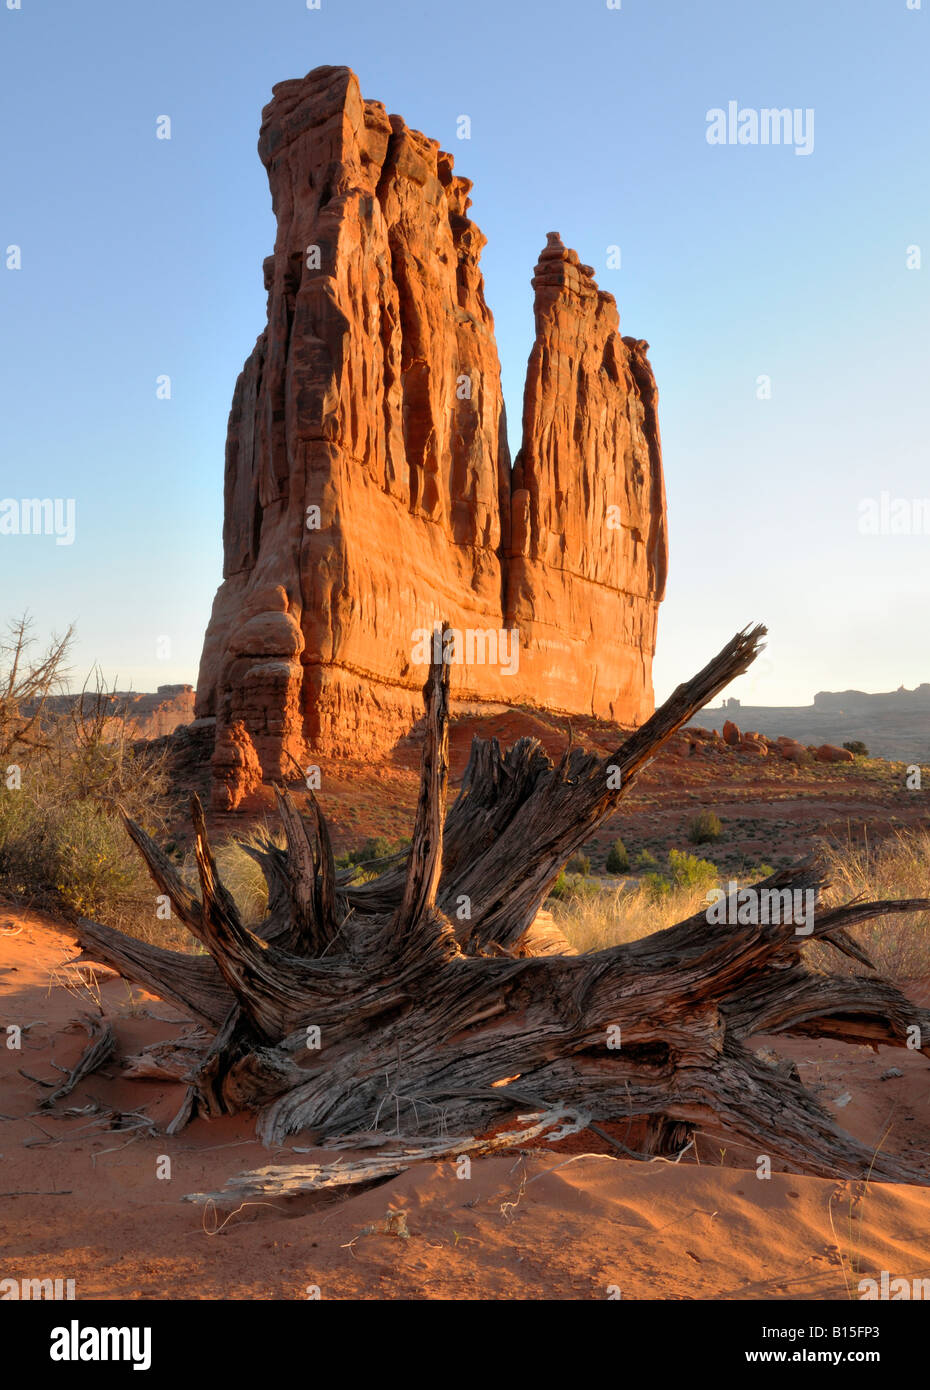 Arches Nationalpark - Courthouse Towers und Bristlecone Kiefer bei Sonnenaufgang Stockfoto